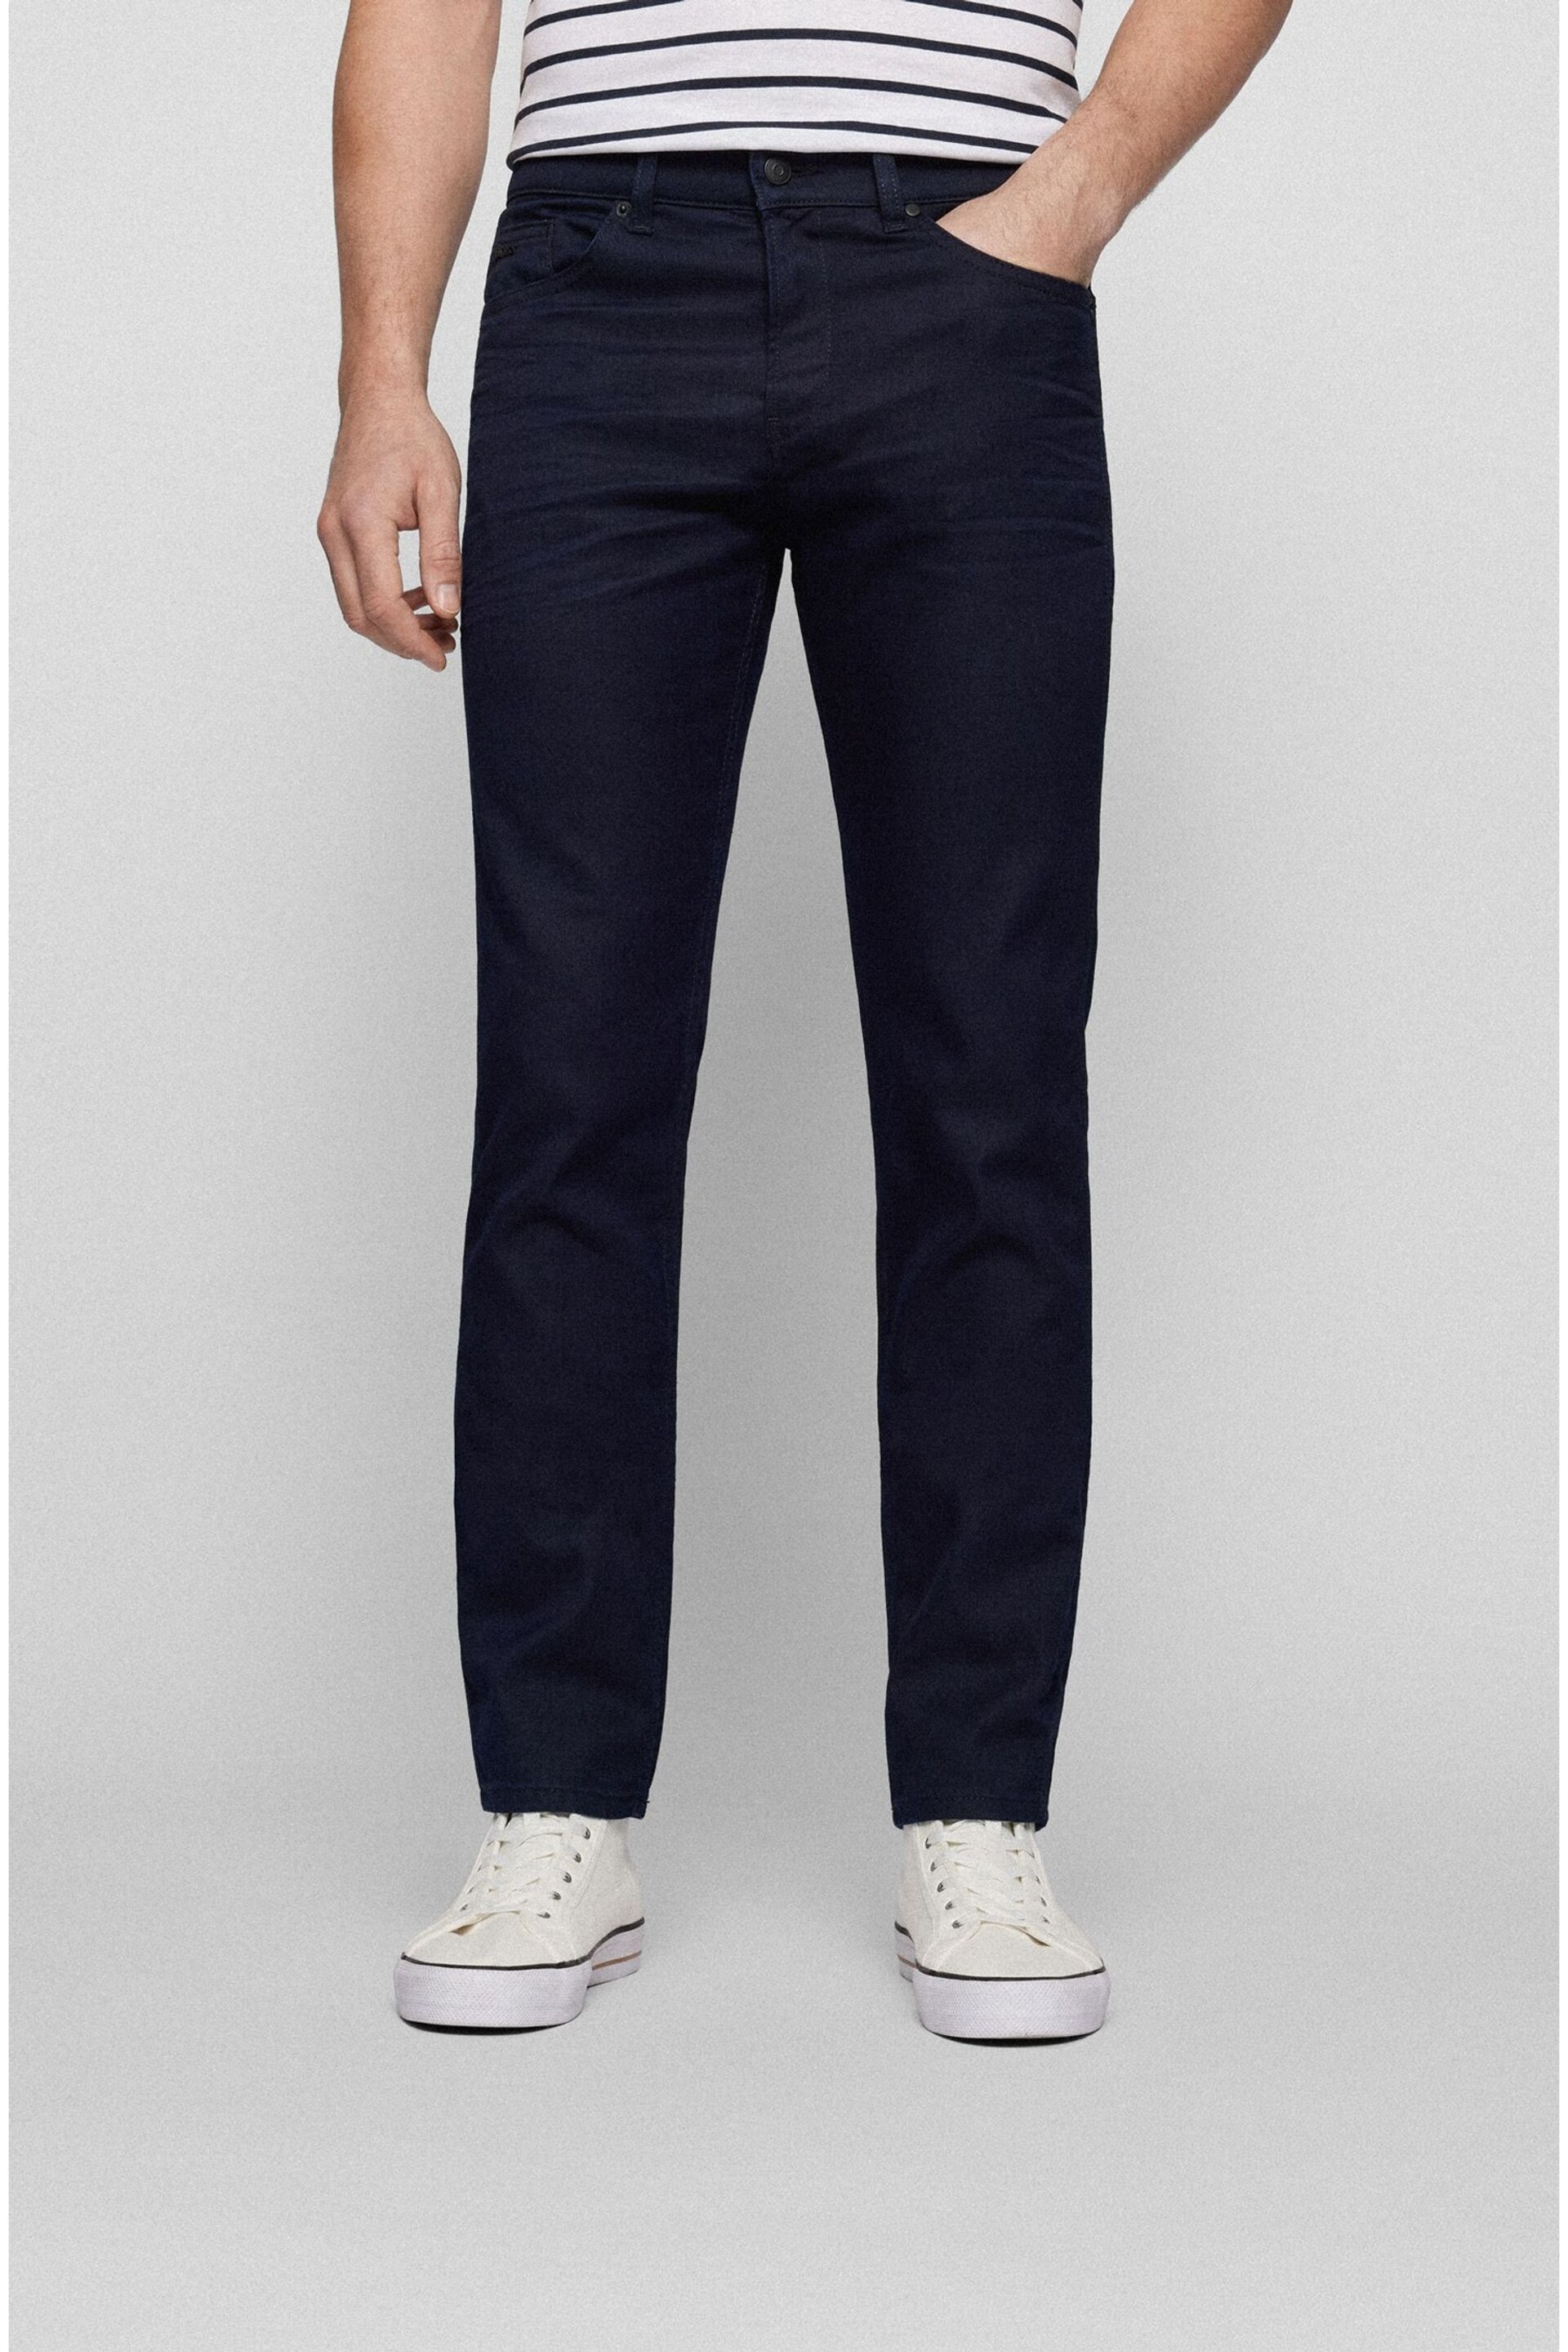 BOSS Blue Delaware Slim Fit Stretch Jeans - Image 2 of 5